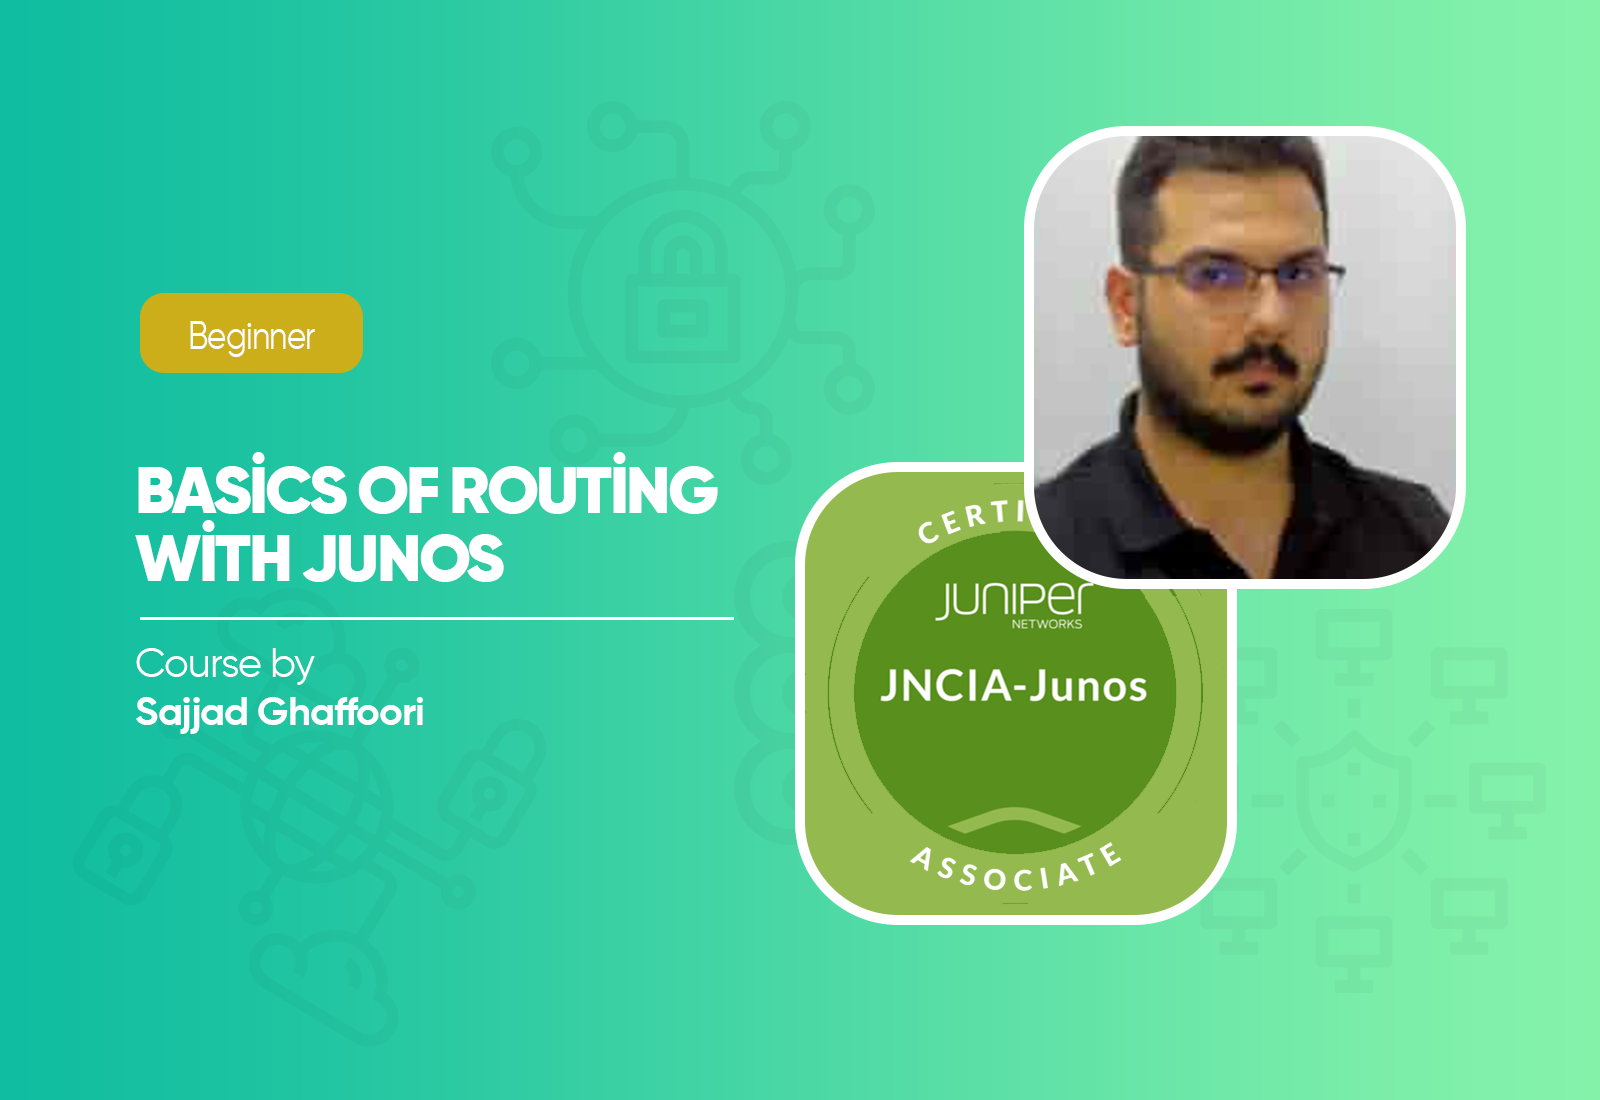 Basics of Routing with JunOS Course